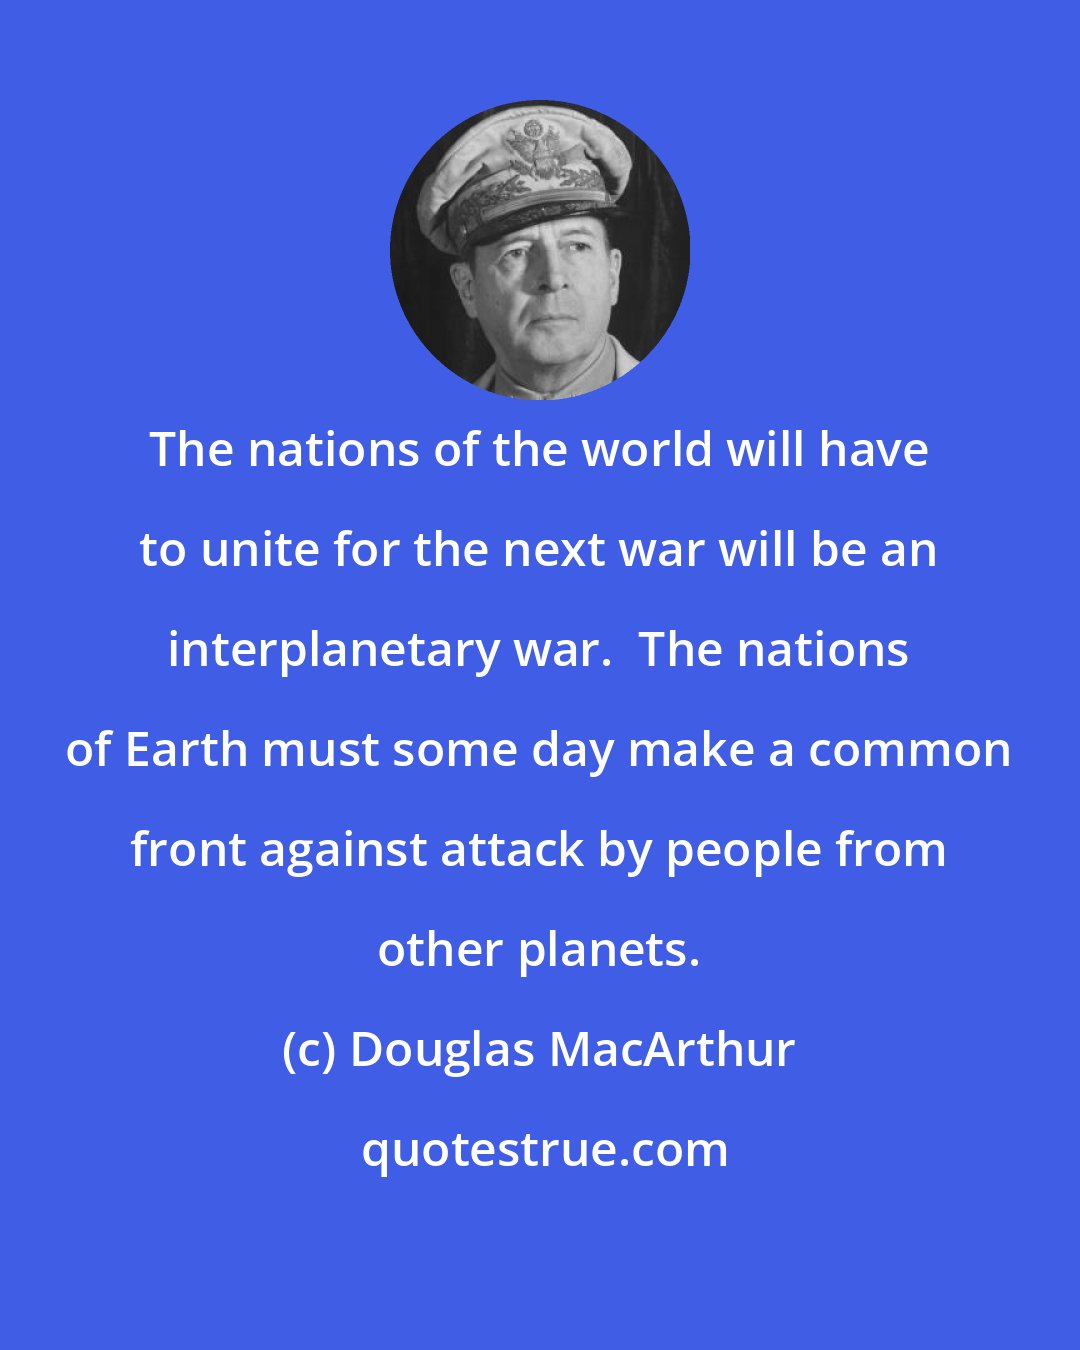 Douglas MacArthur: The nations of the world will have to unite for the next war will be an interplanetary war.  The nations of Earth must some day make a common front against attack by people from other planets.